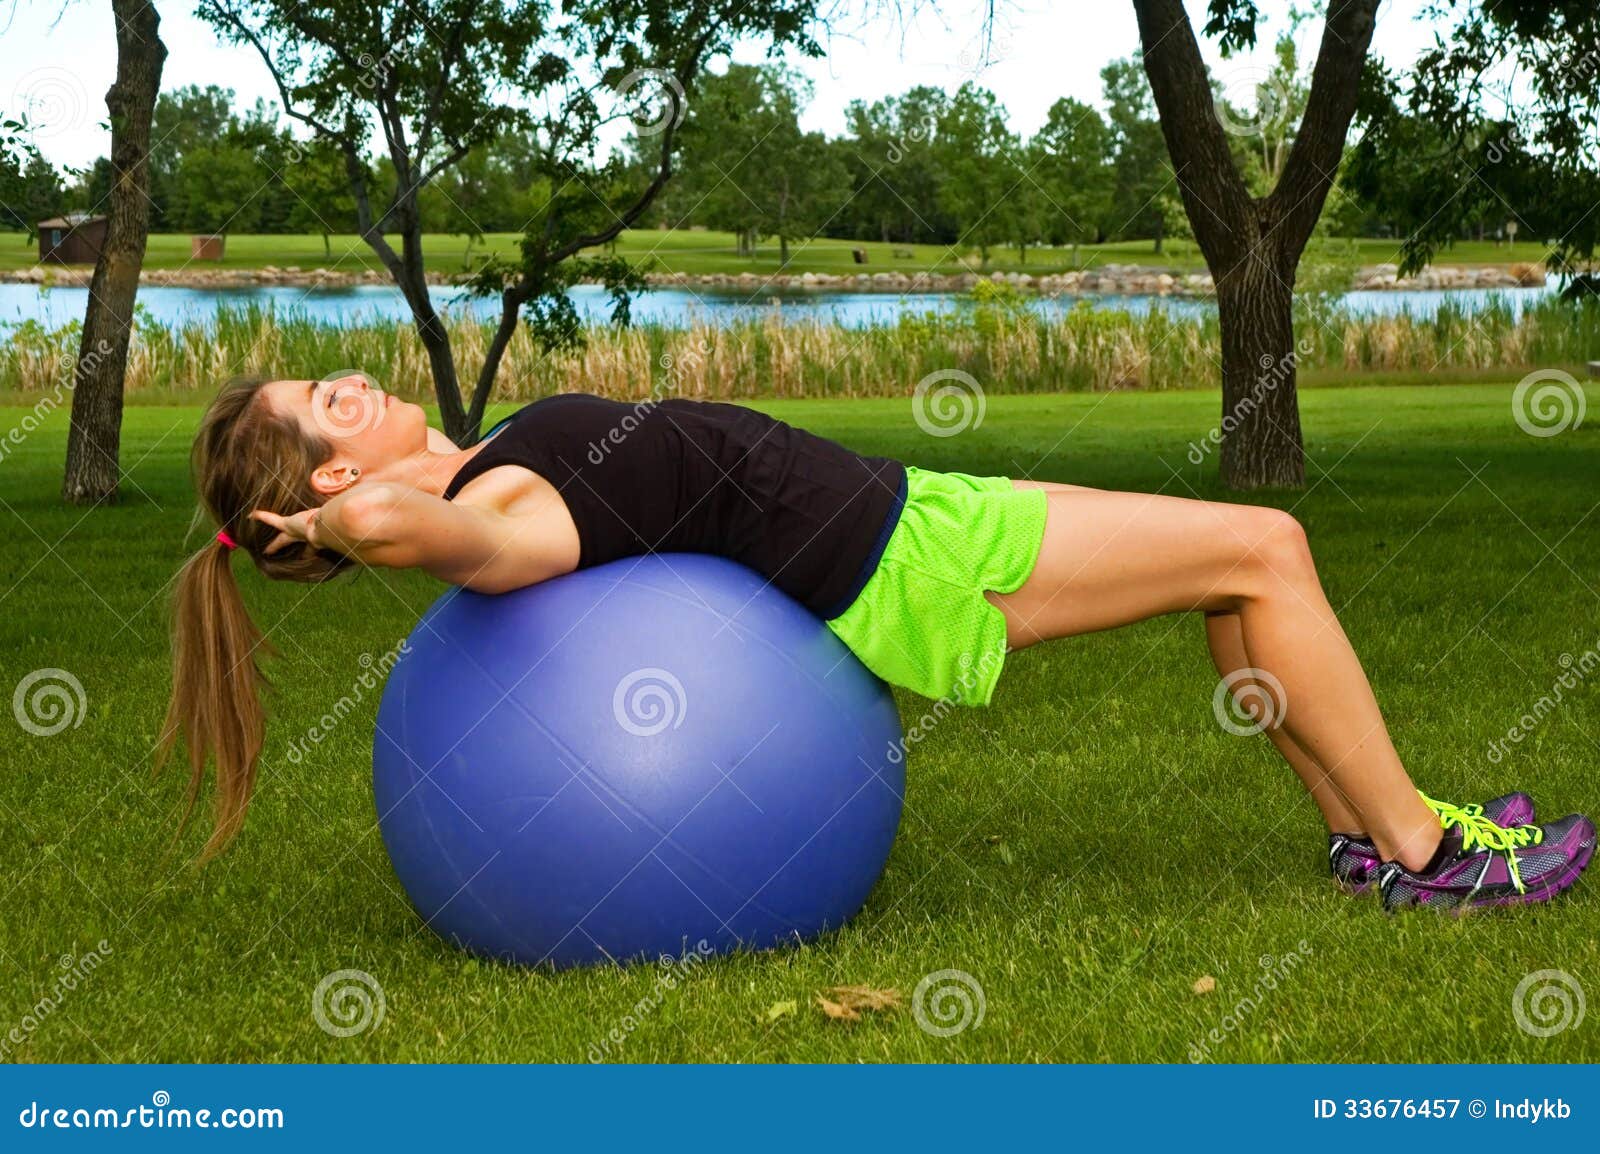 Situps On Exercise Ball Stock Image Image Of Park Abdomen 33676457